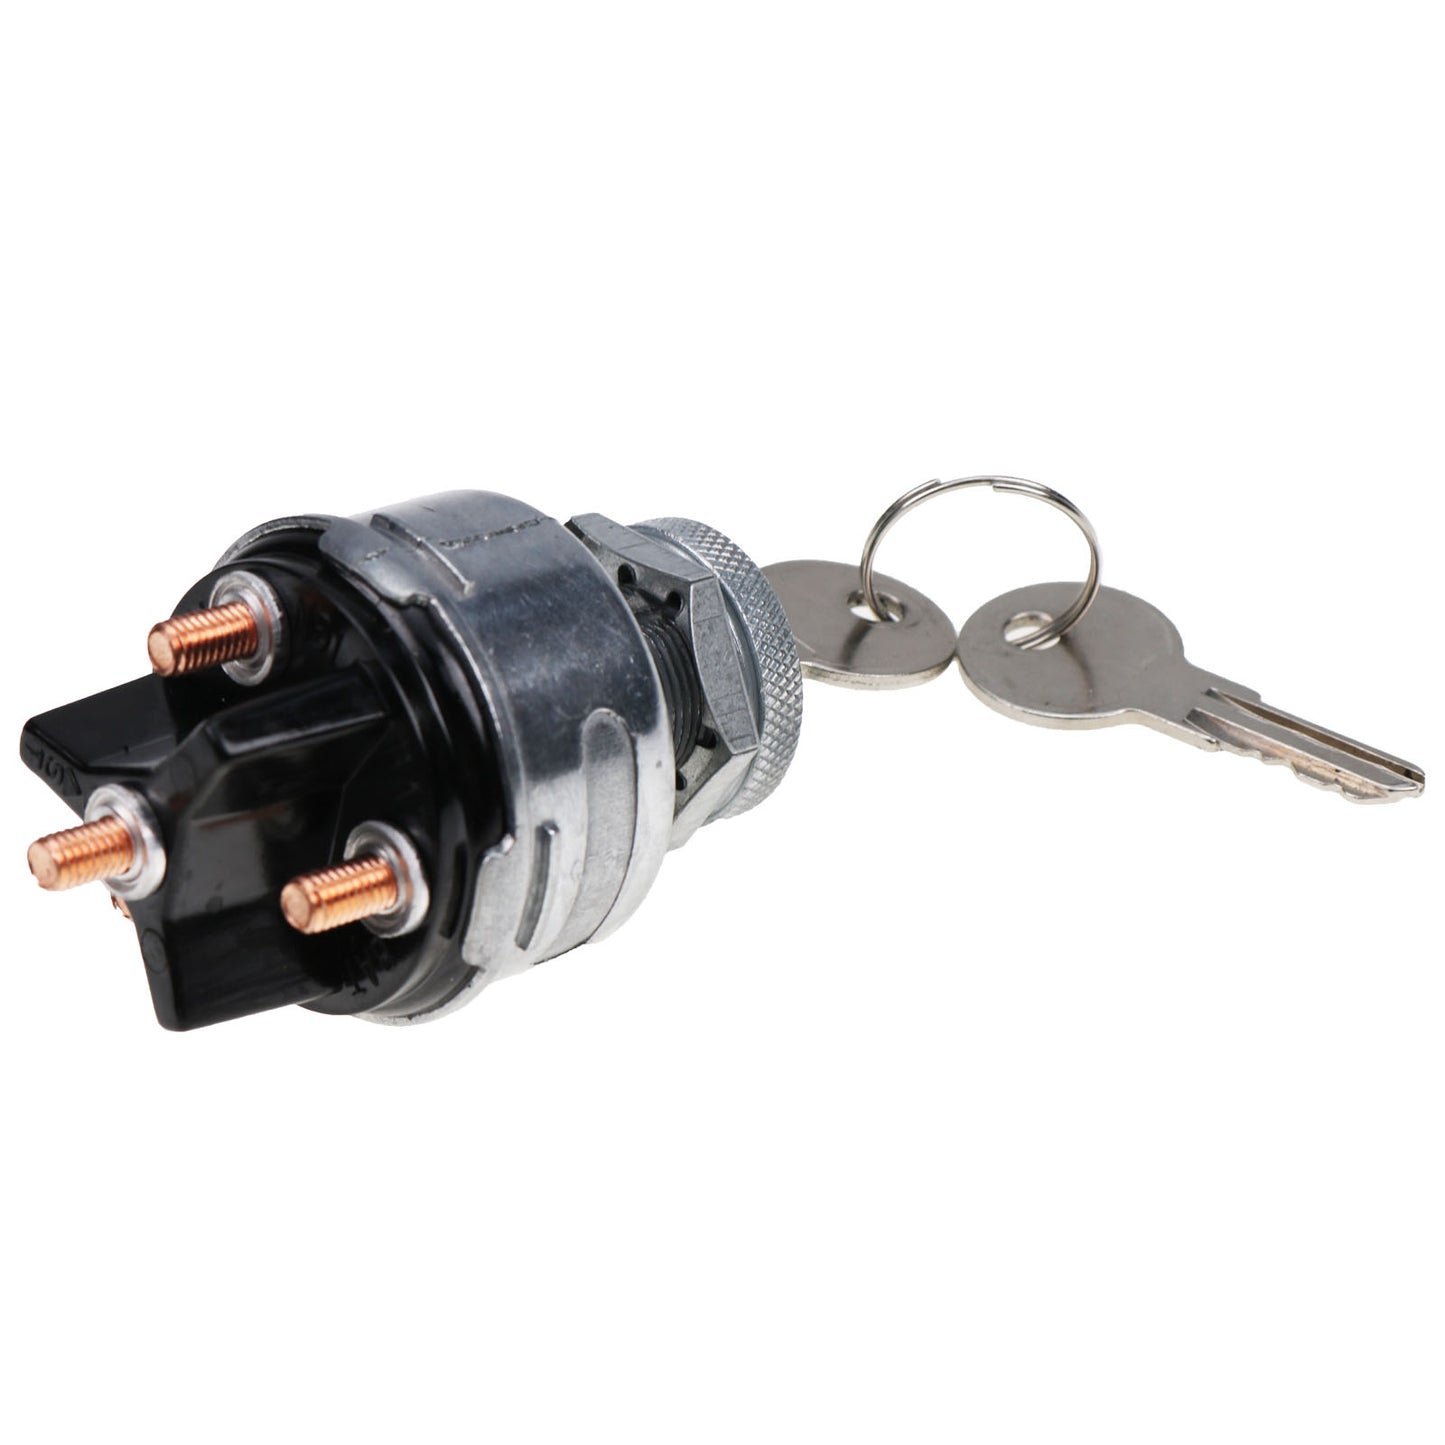 New 641833 80641833 Ignition Switch Compatible with New Holland L150 L160 L170 L180 L175 L785 L865 L783 L185 L565 LX485 LX565 LX665 LX885 LX865 C185 C190 C175